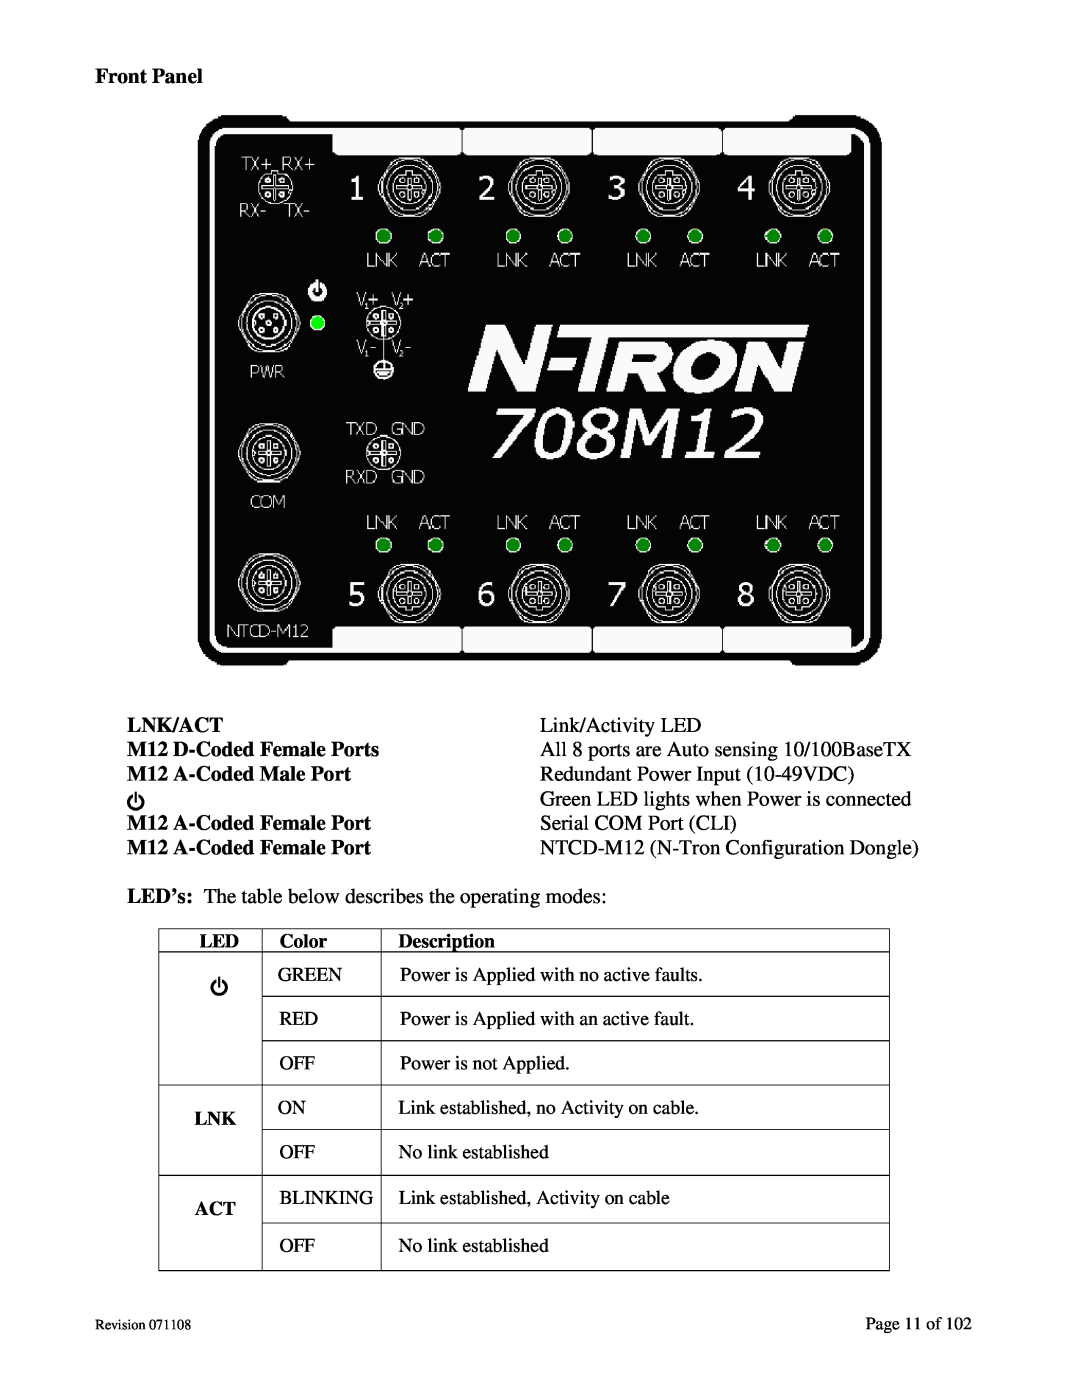 N-Tron 708M12 Front Panel, Lnk/Act, Link/Activity LED, M12 D-Coded Female Ports, All 8 ports are Auto sensing 10/100BaseTX 